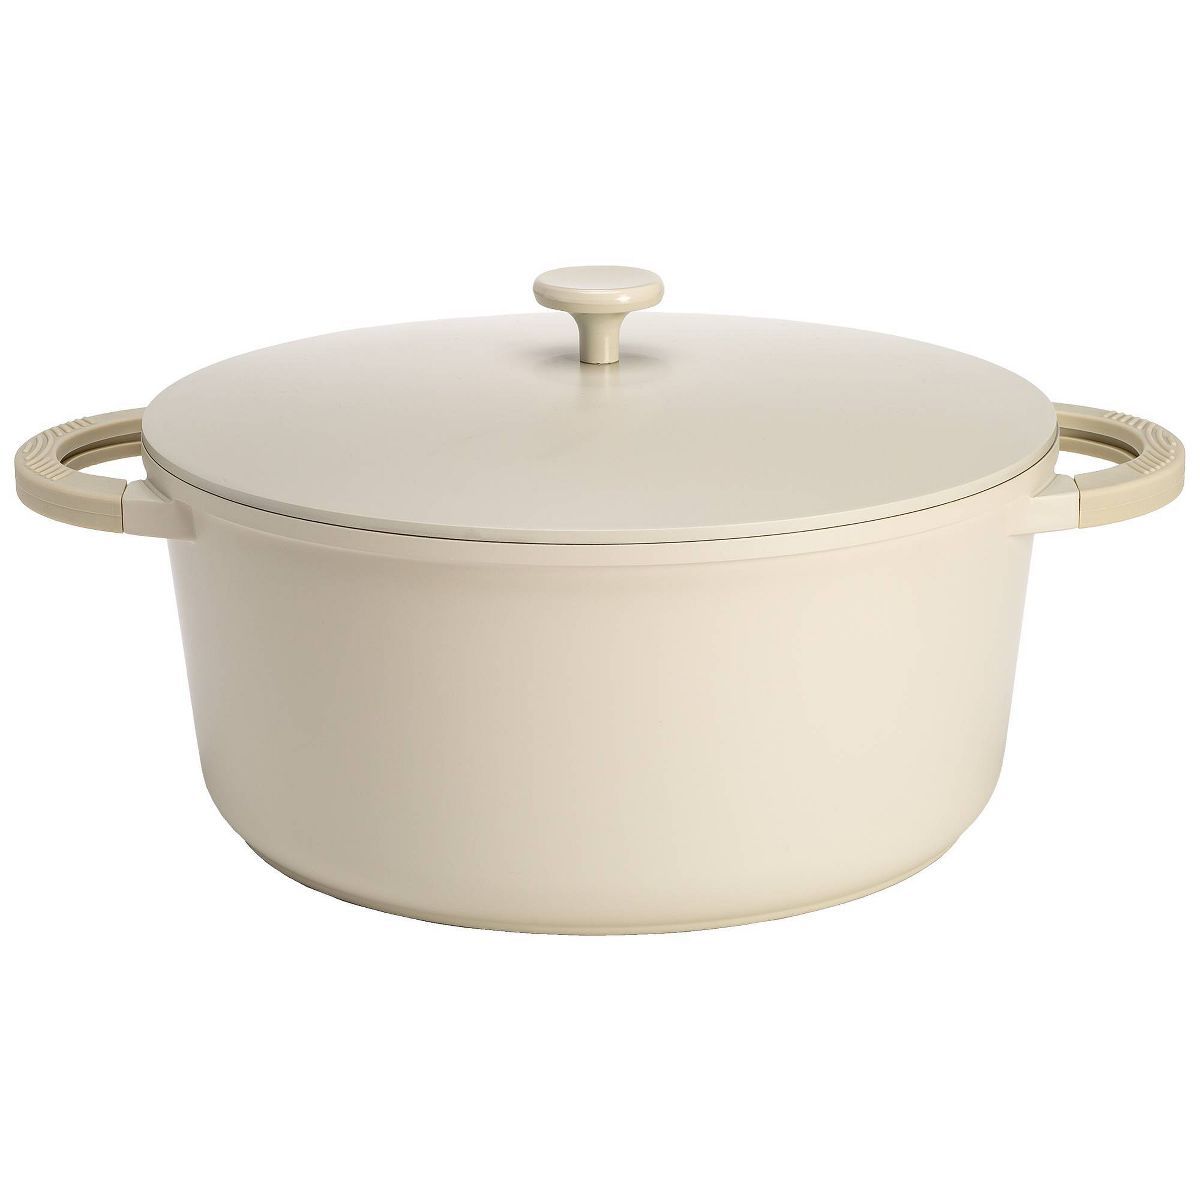 Goodful 7qt Cast Aluminum, Ceramic Stock Pot with Lid, Side Handles and Silicone Grip | Target